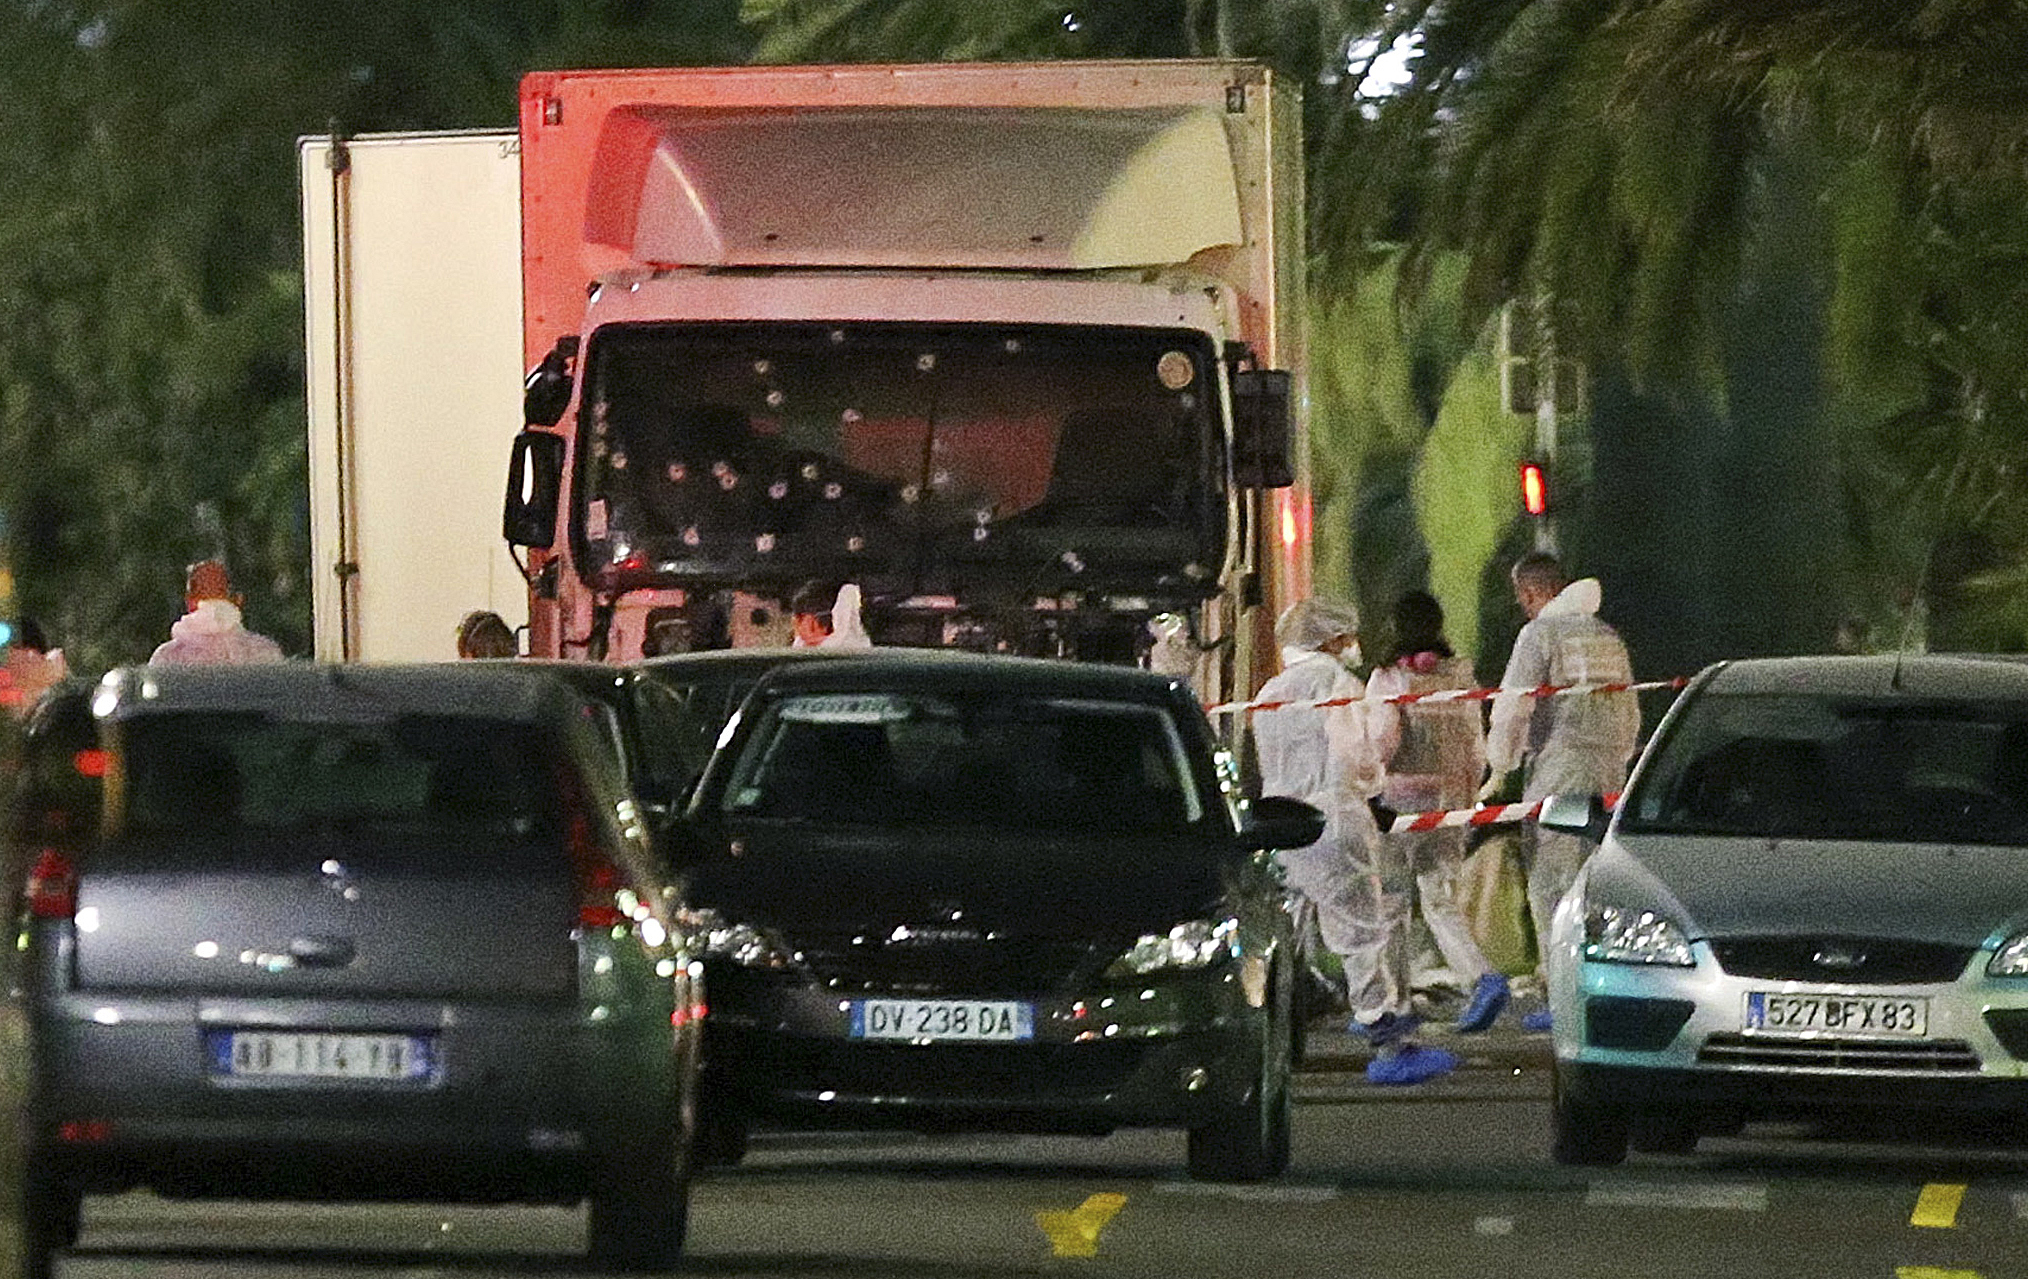 PHOTO: The truck which slammed into revelers July 14, is seen near the site of an attack in the French resort city of Nice, southern France, July 15, 2016.